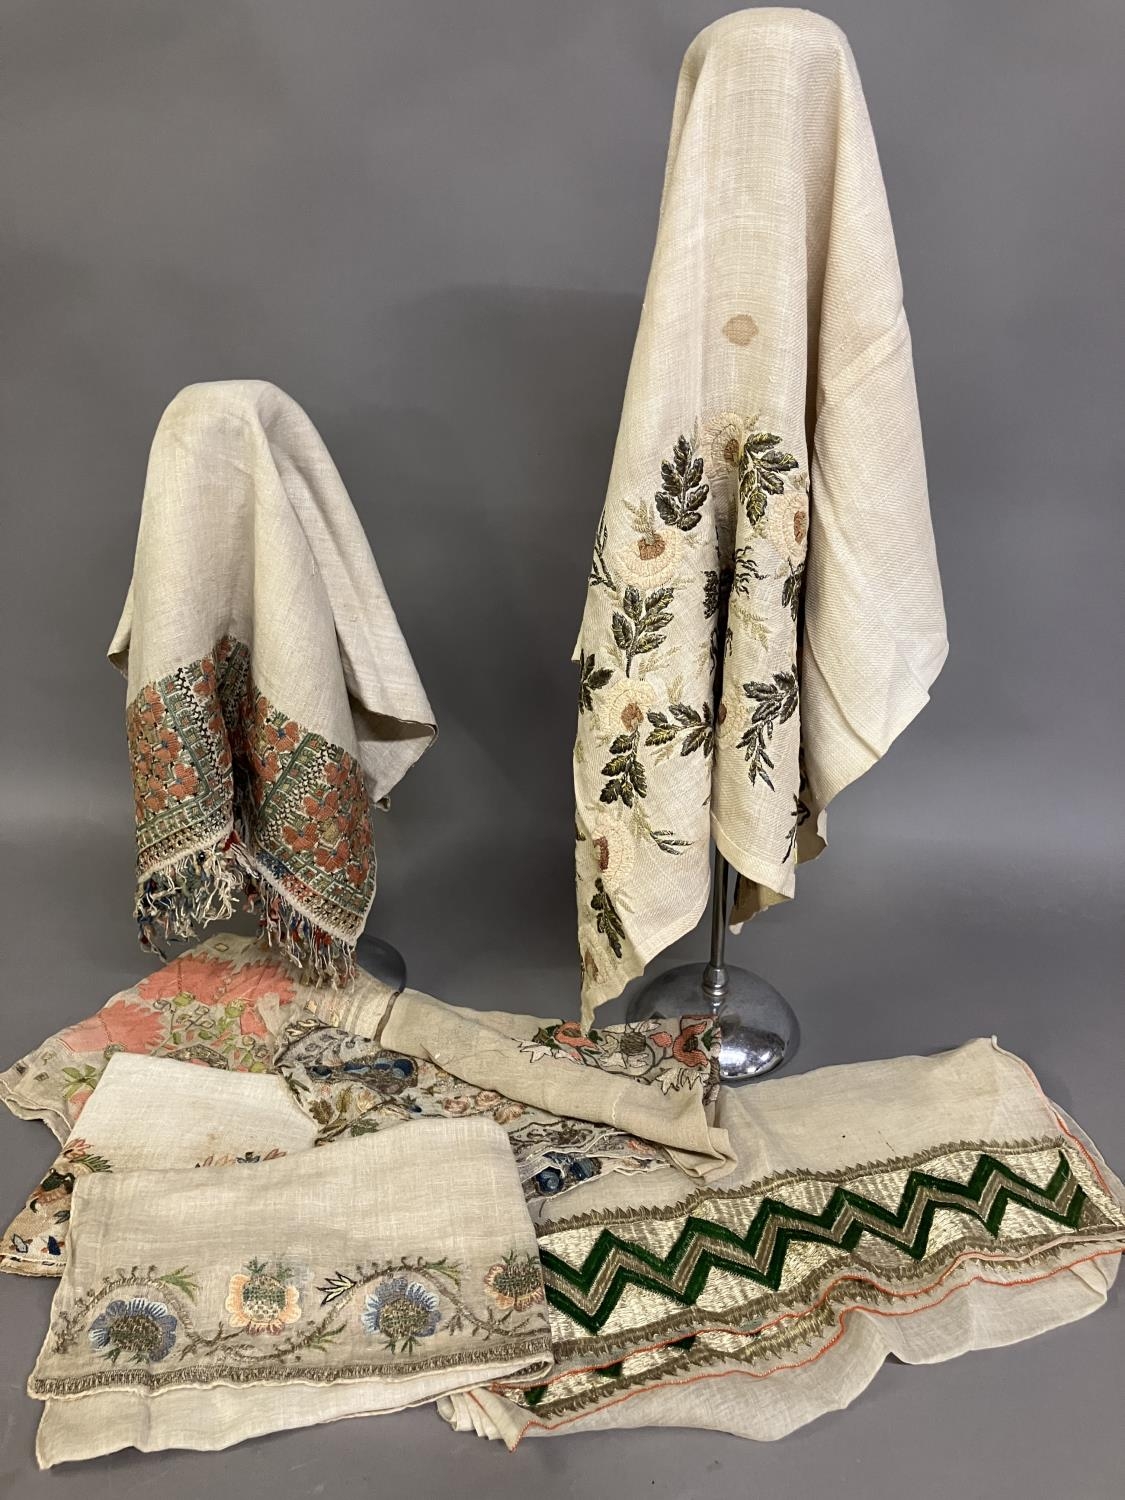 Ottoman textiles, a selection of towels and a shawl: a medium weight towel with silk embroidery to